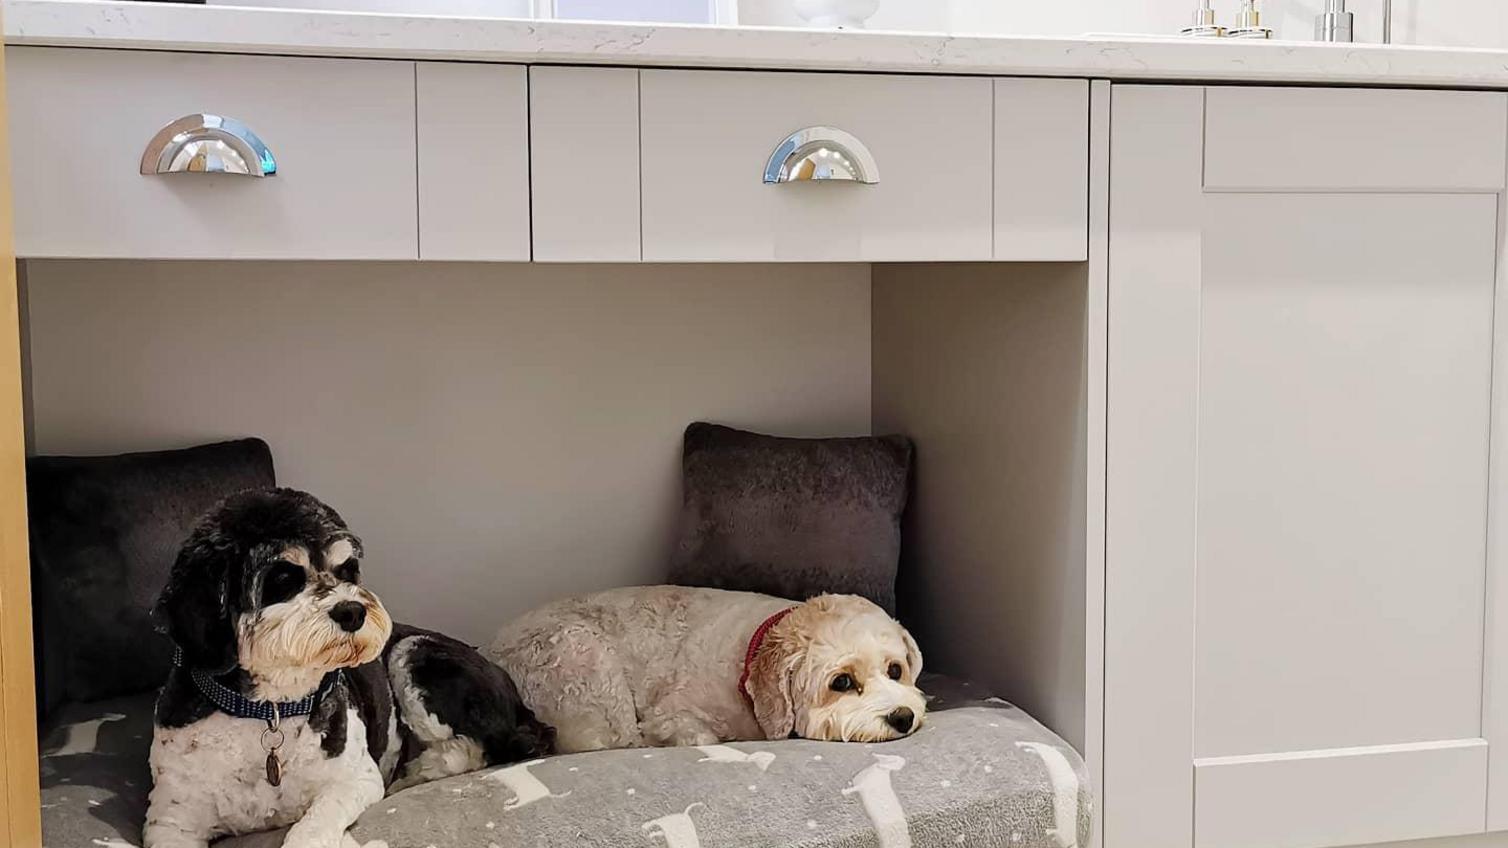 A combination of drawers & cabinets, plus a dog bed area, for a pet-friendly boot room storage idea.